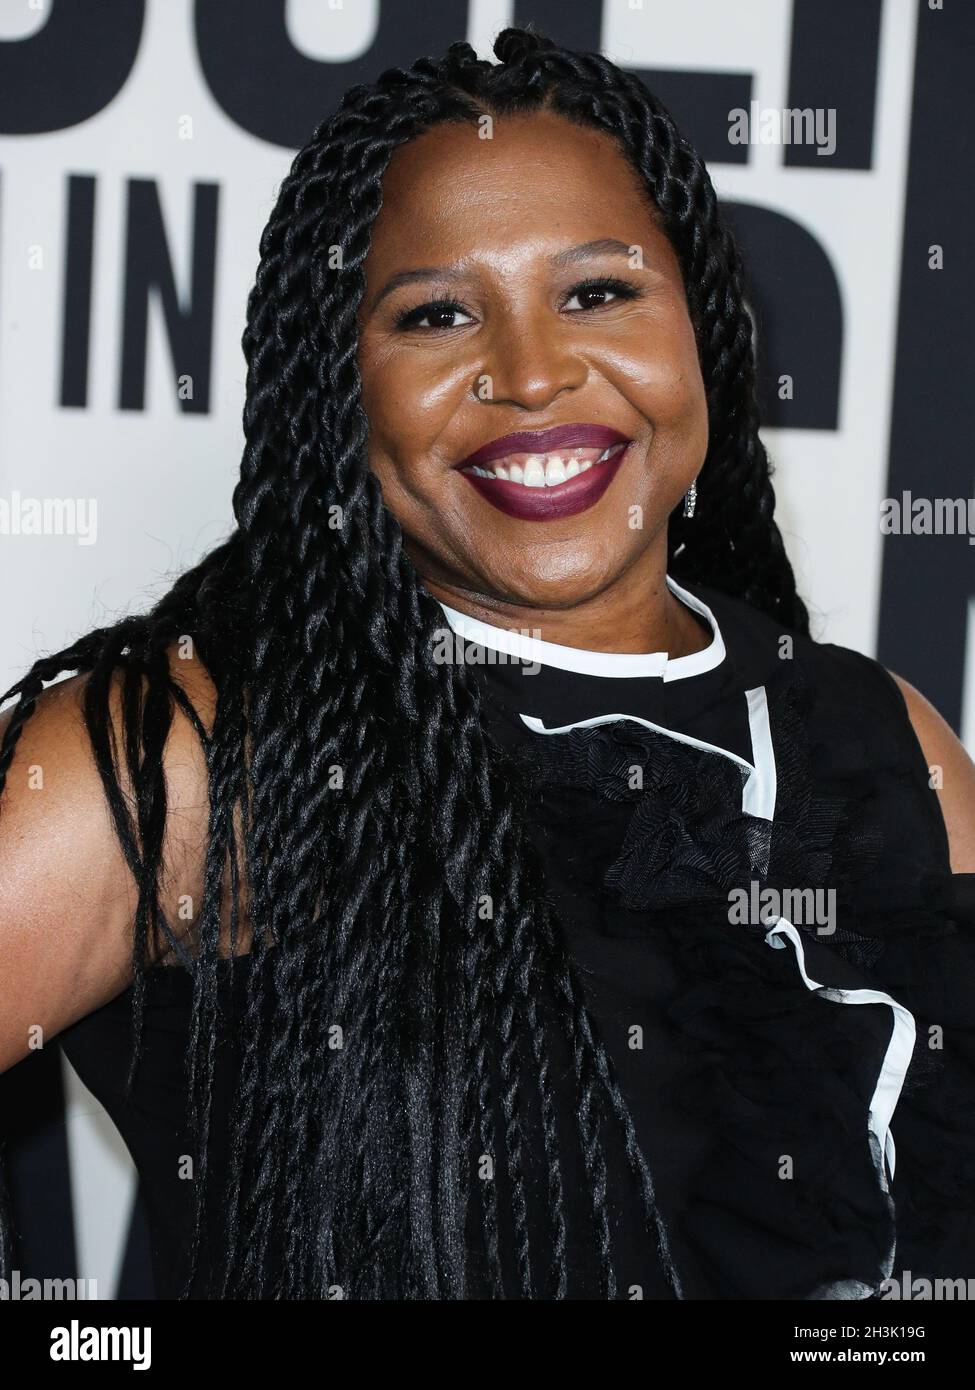 LOS ANGELES, CALIFORNIA, USA - OCTOBER 28: Director Angel Kristi Williams arrives at the Los Angeles Premiere Of Netflix's 'Colin In Black And White' held at the Academy Museum of Motion Pictures on October 28, 2021 in Los Angeles, California, United States. (Photo by Xavier Collin/Image Press Agency) Stock Photo